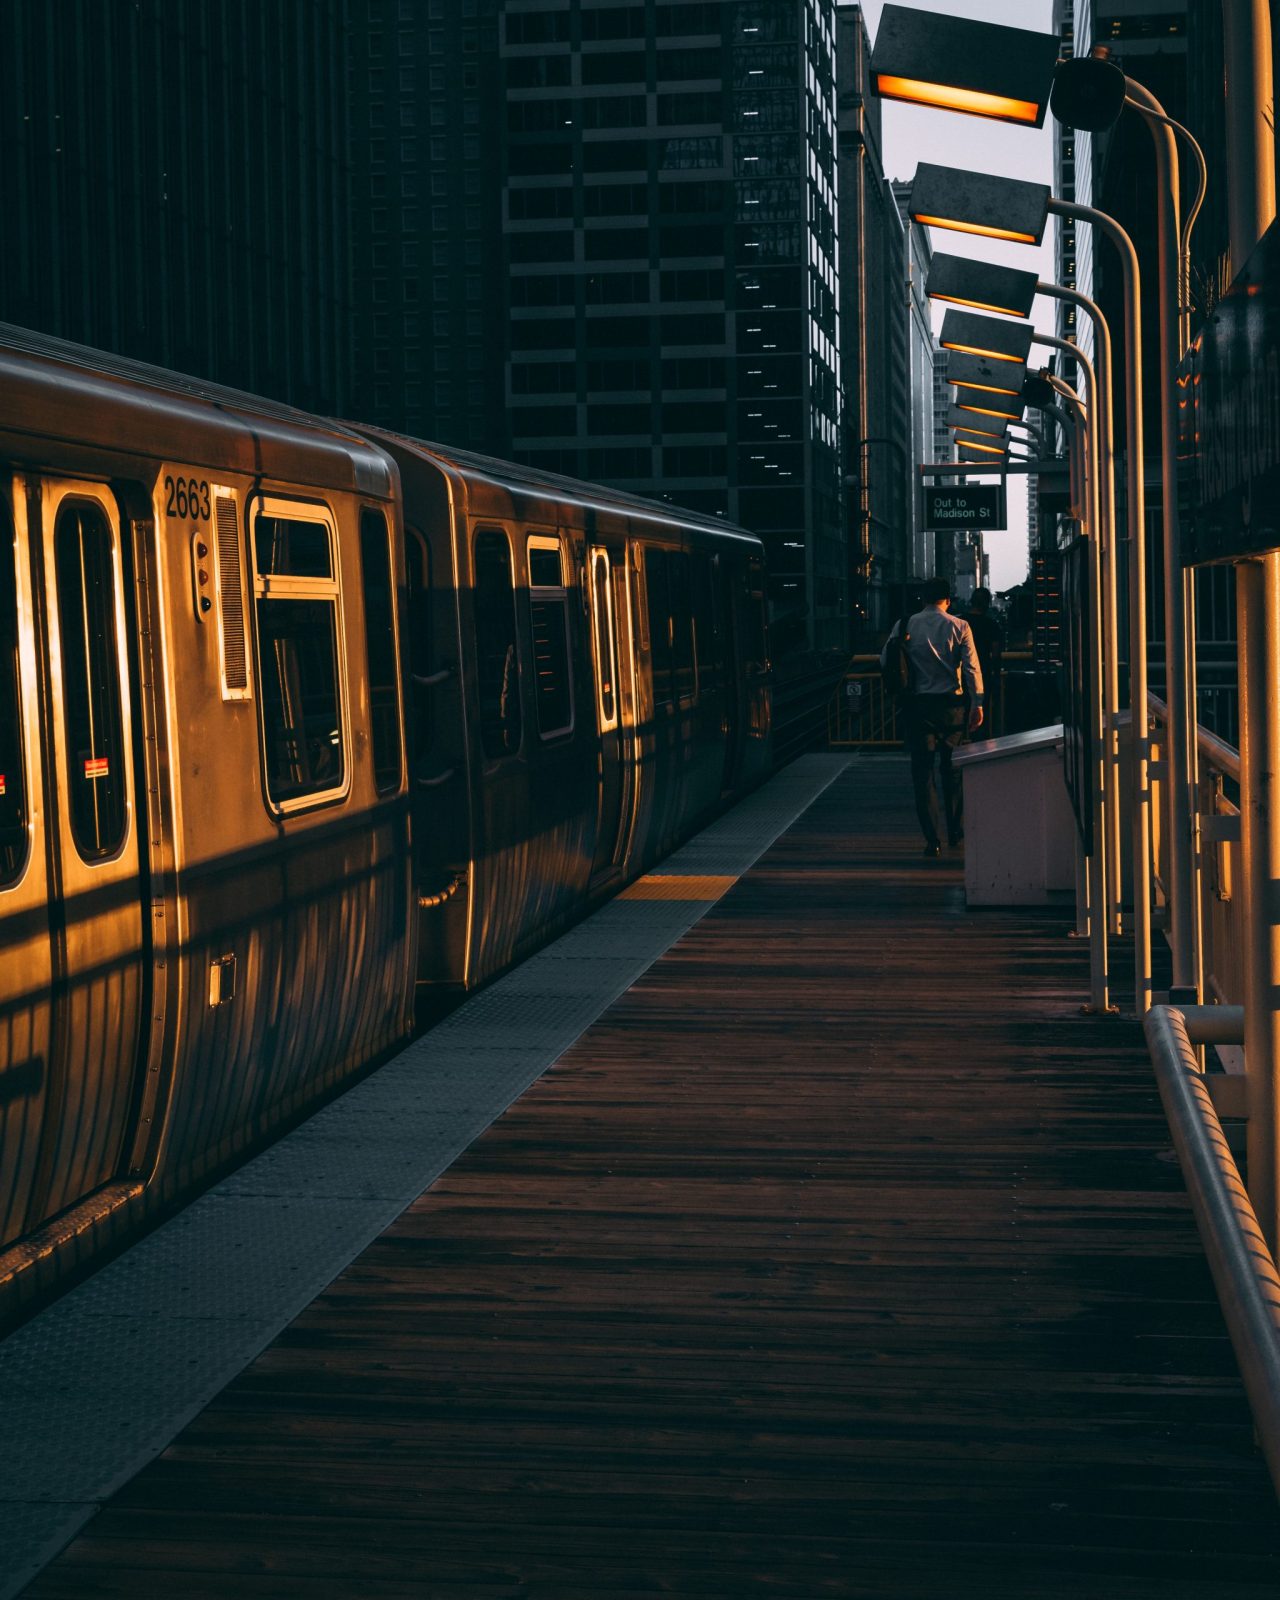 A vertical shot of a in-train solution during the sunrise